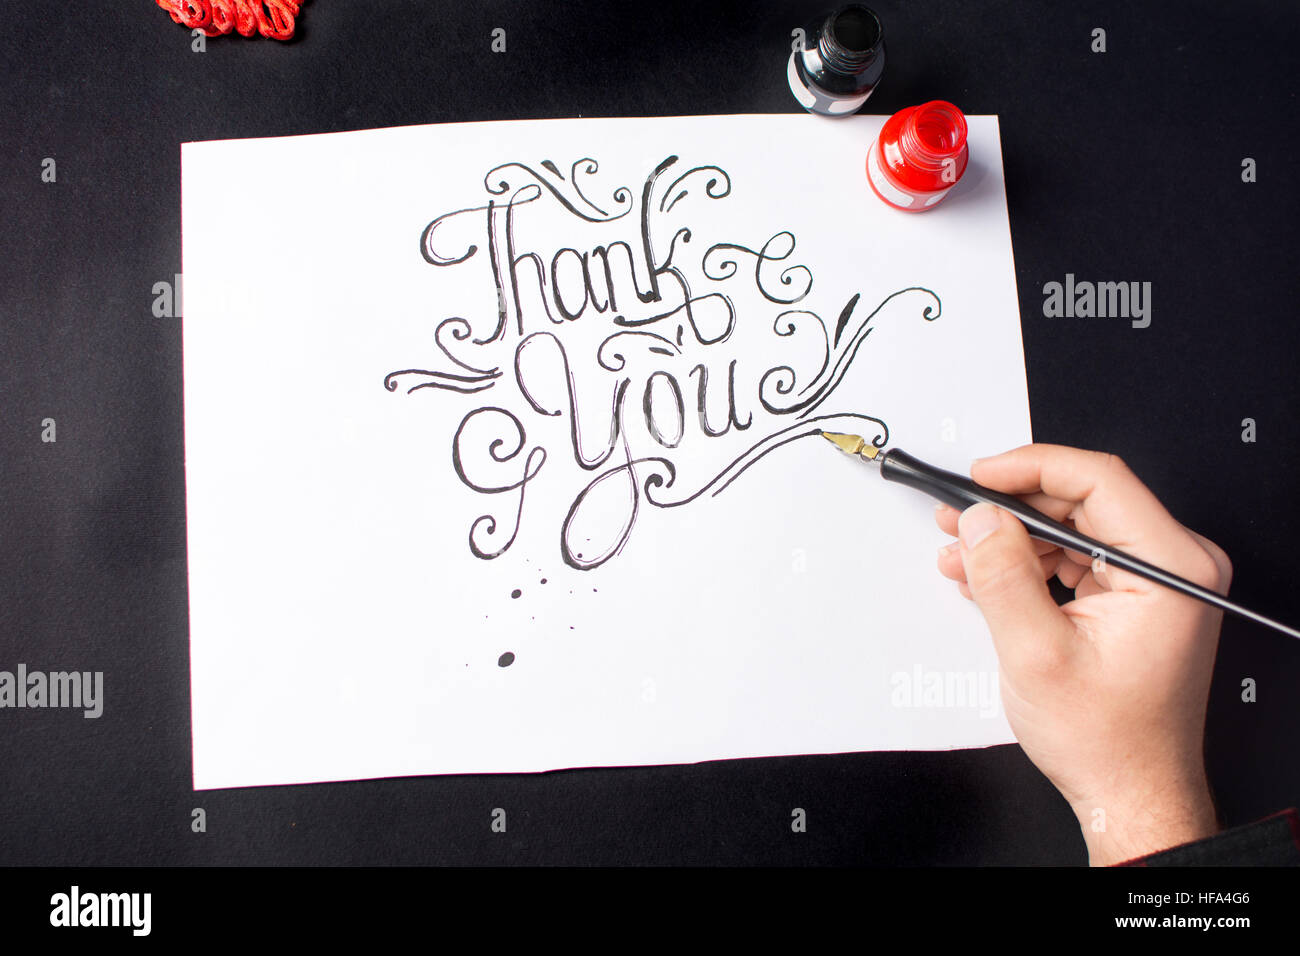 Man writing a Thank you note calligraphy Stock Photo